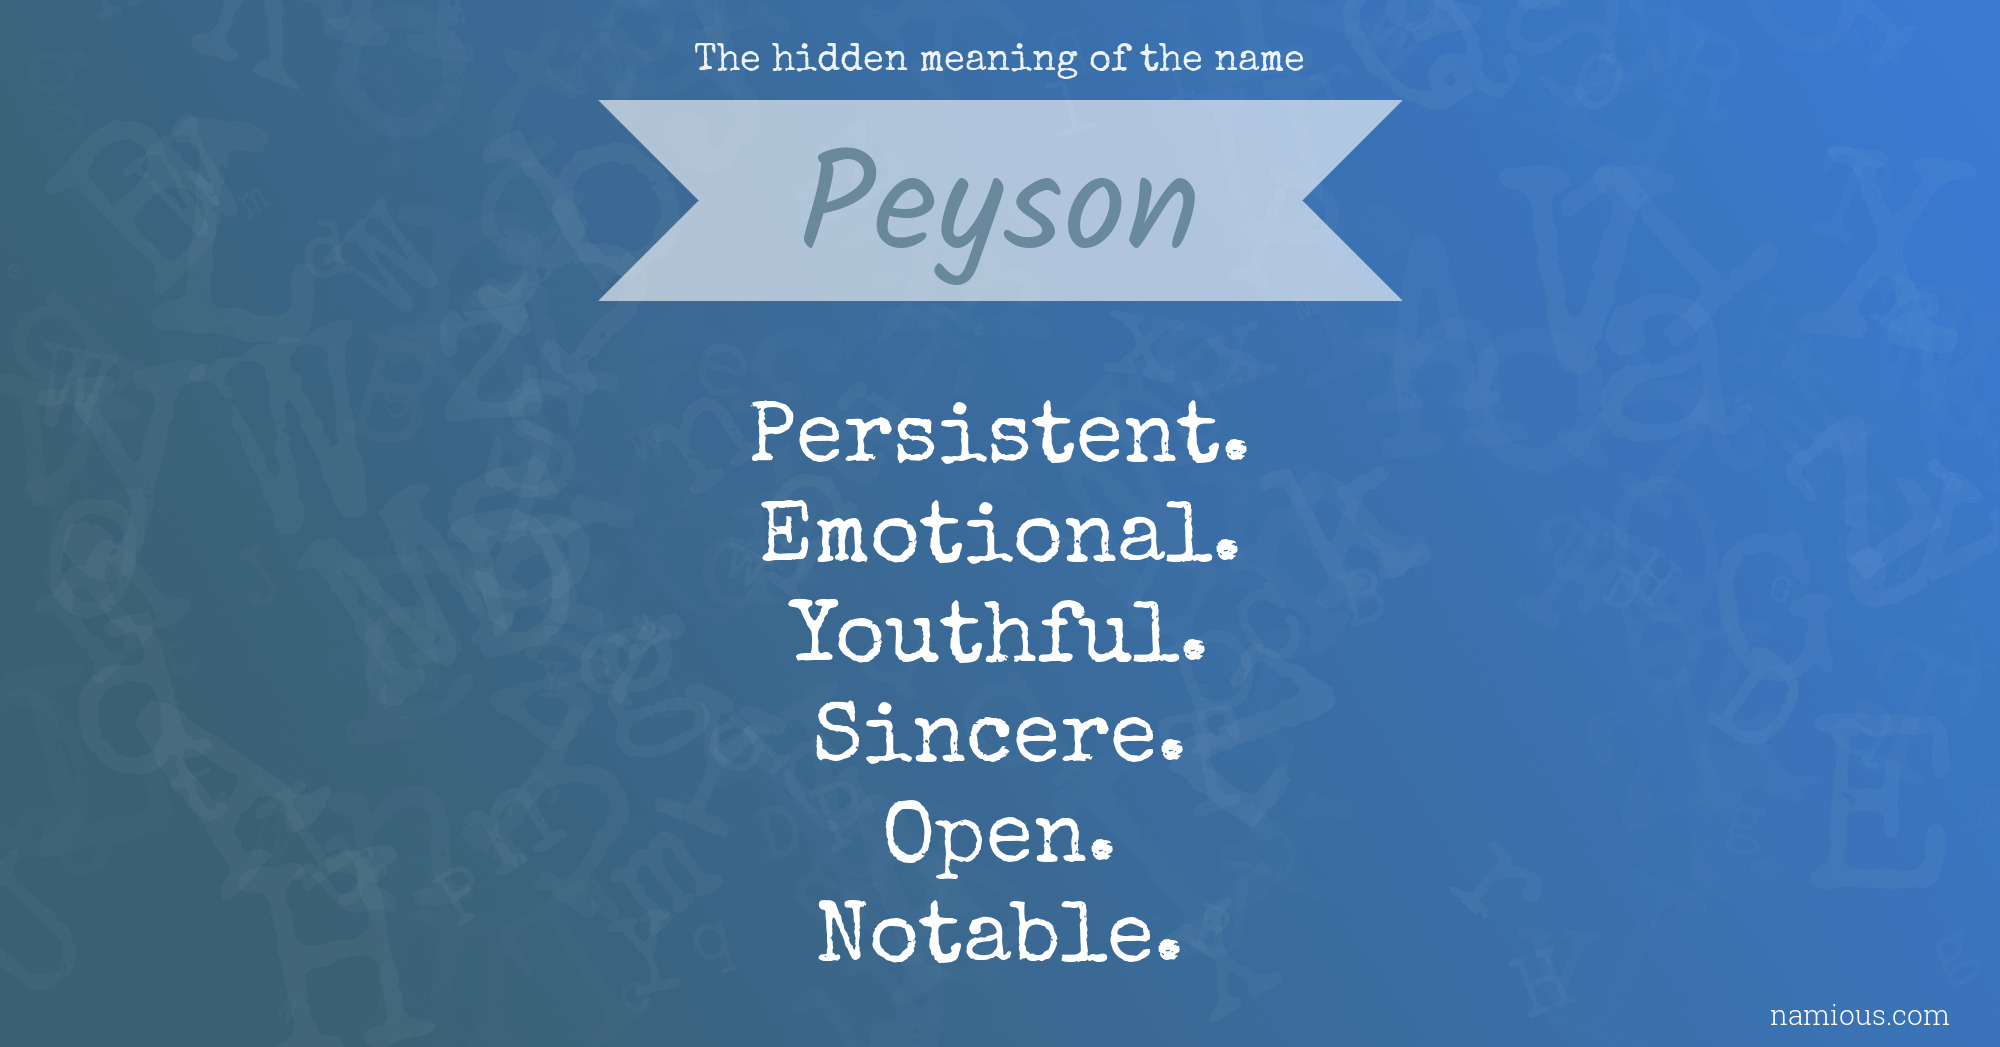 The hidden meaning of the name Peyson